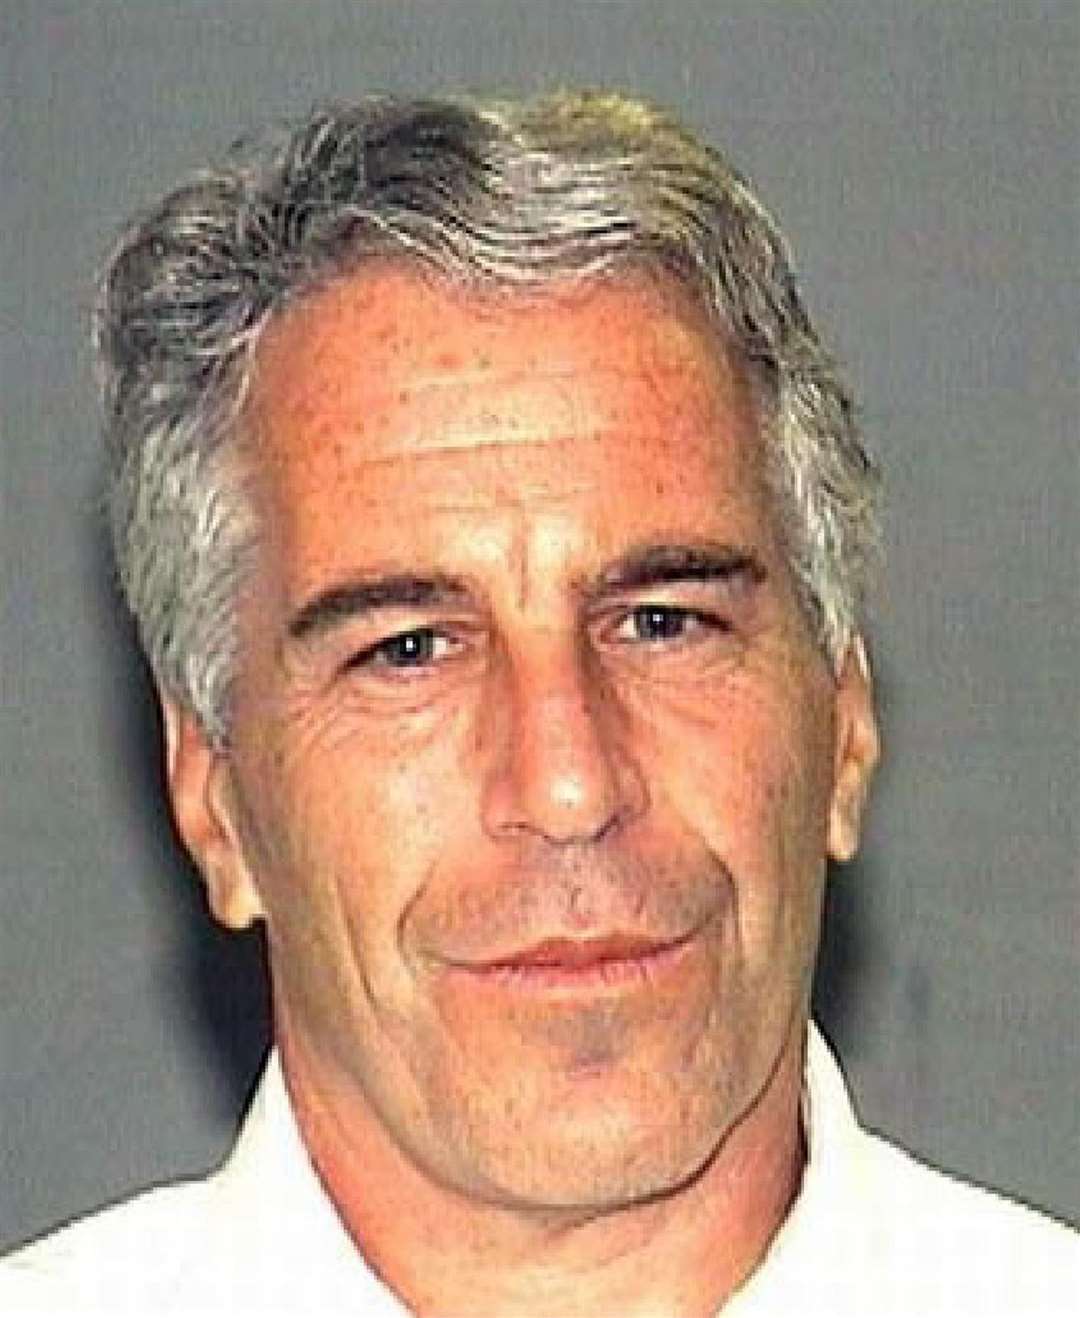 Jeffrey Epstein was found dead in his cell at a federal jail in Manhattan in August 2019 while he was awaiting trial on sex trafficking charges (US Department of Justice/PA)